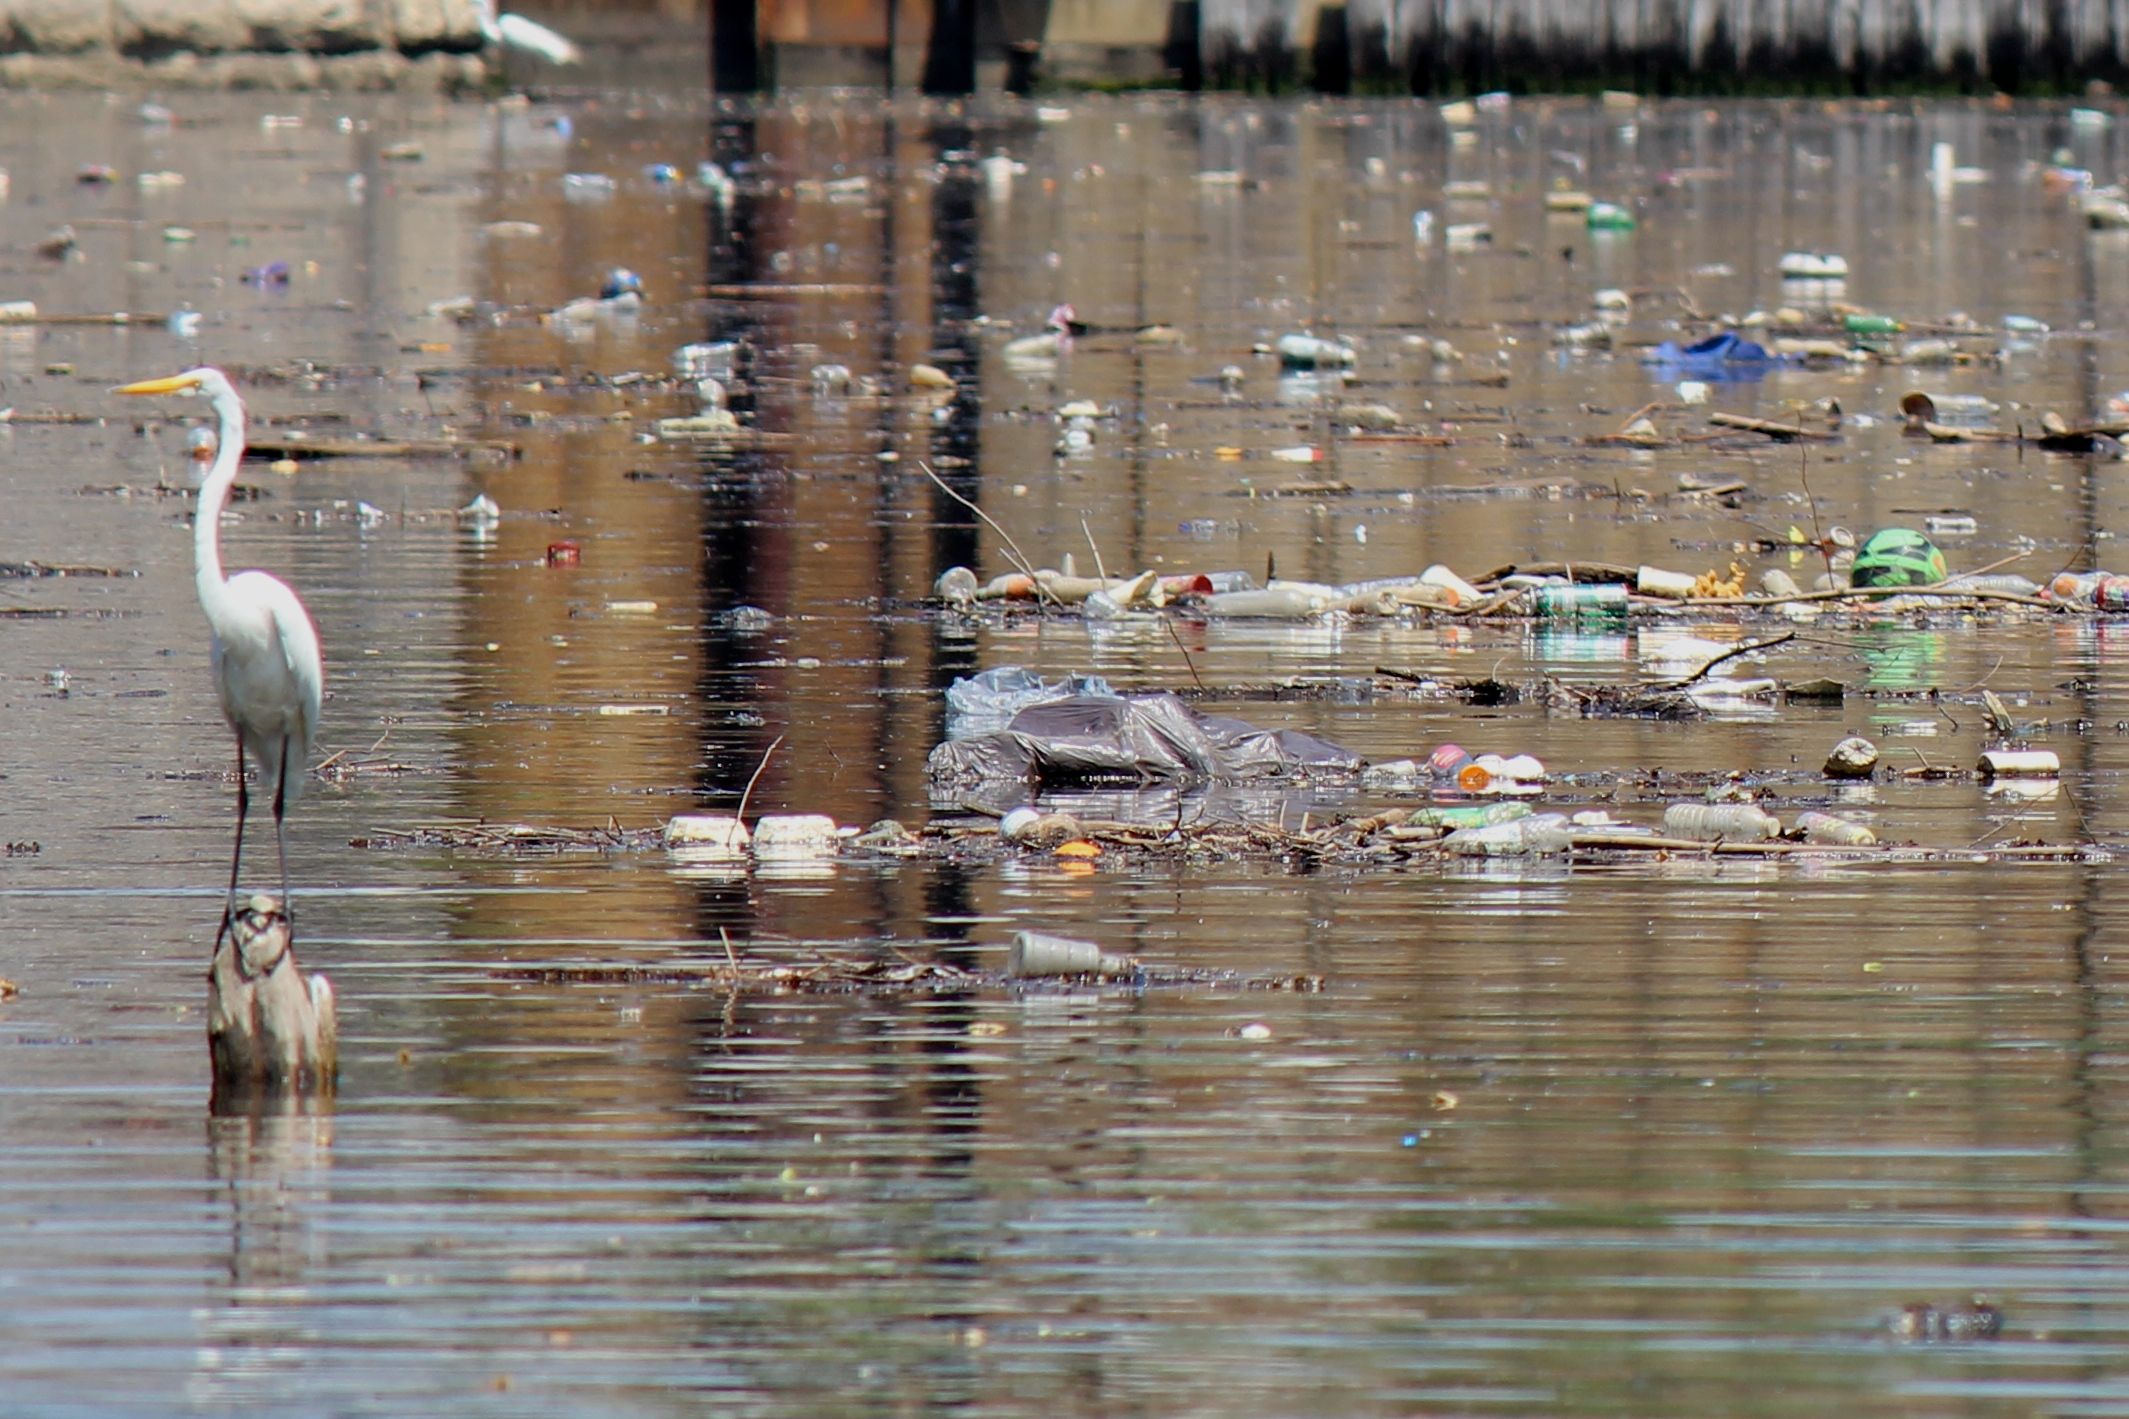 Exploring polluted NYC waterways 'You have to decide, I’m going to do